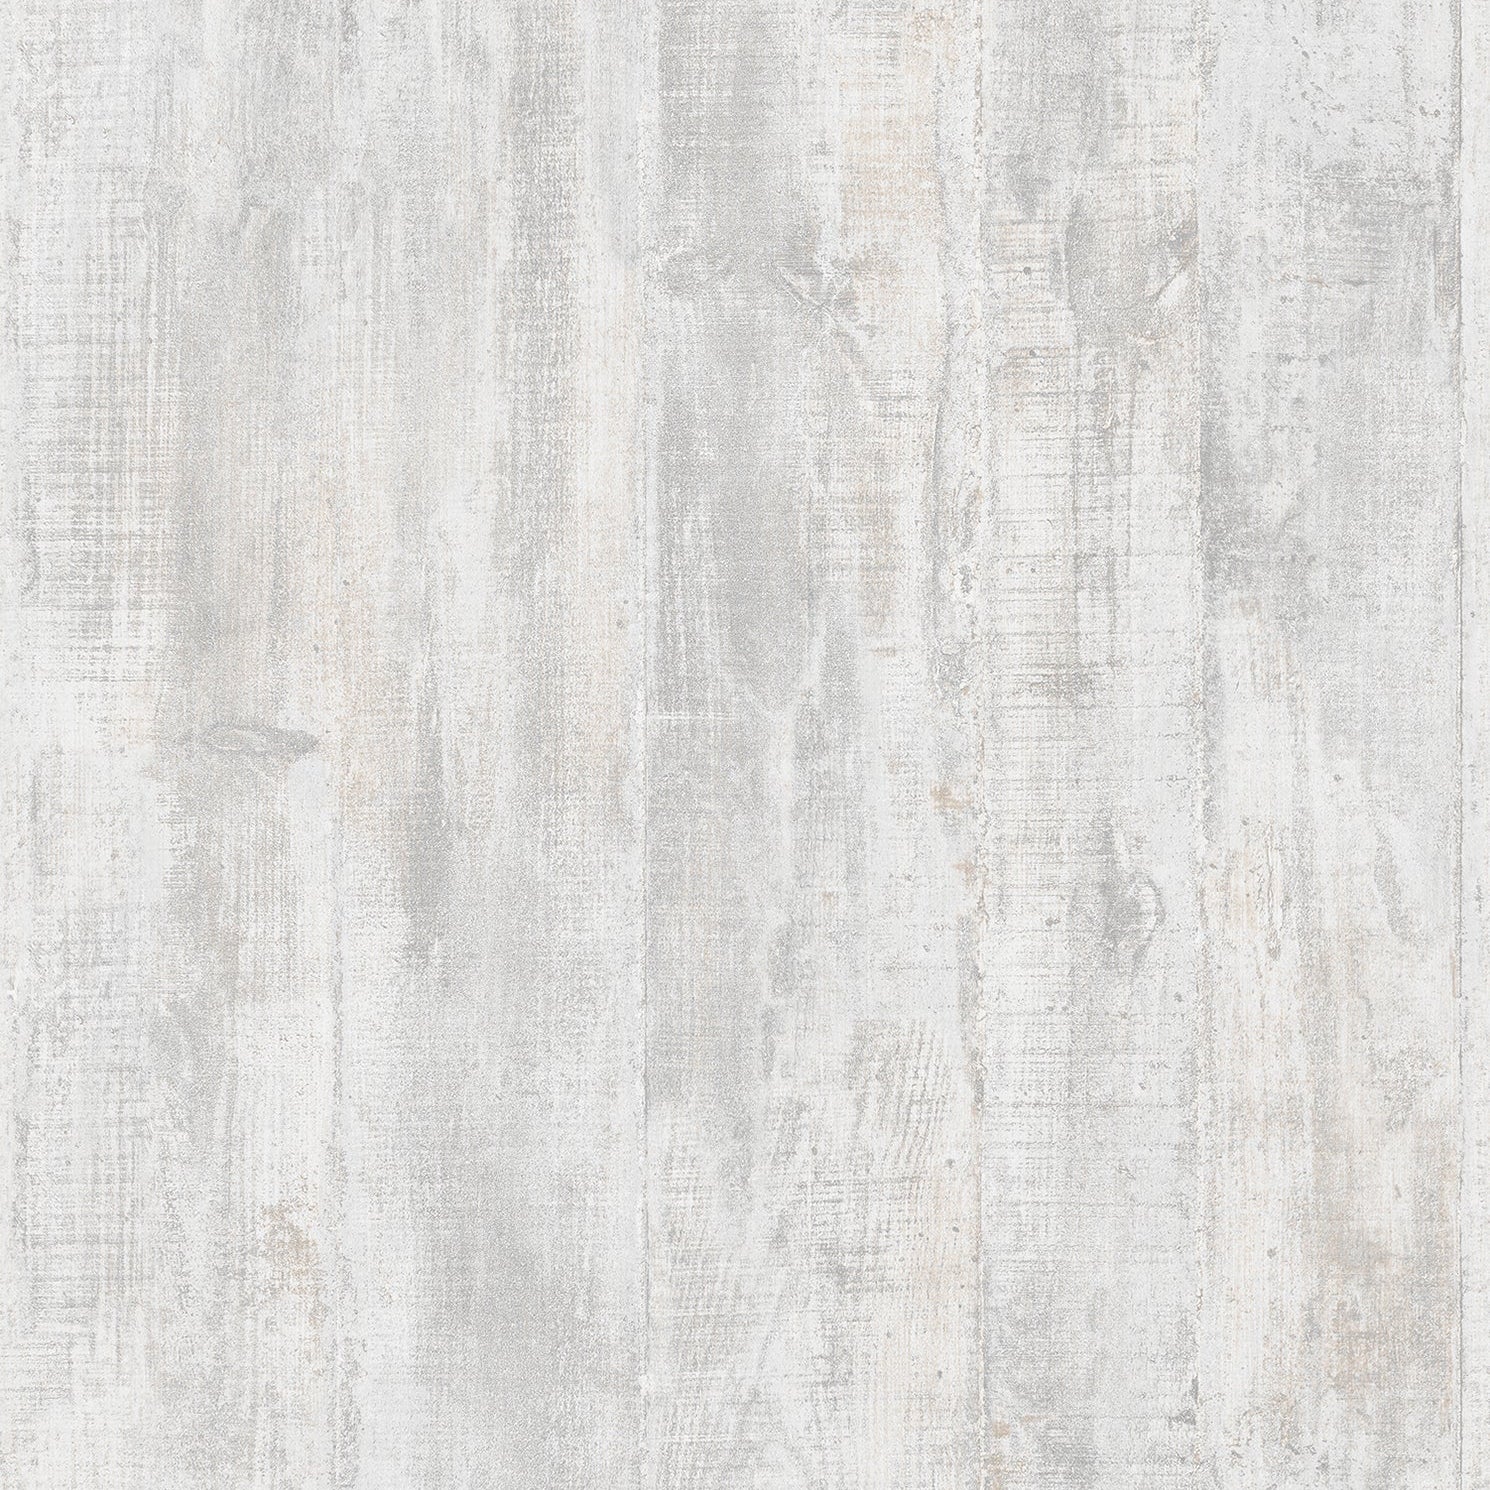 Order 4020-68309 Geo & Textures Huck Light Grey Weathered Wood Plank Light Grey by Advantage